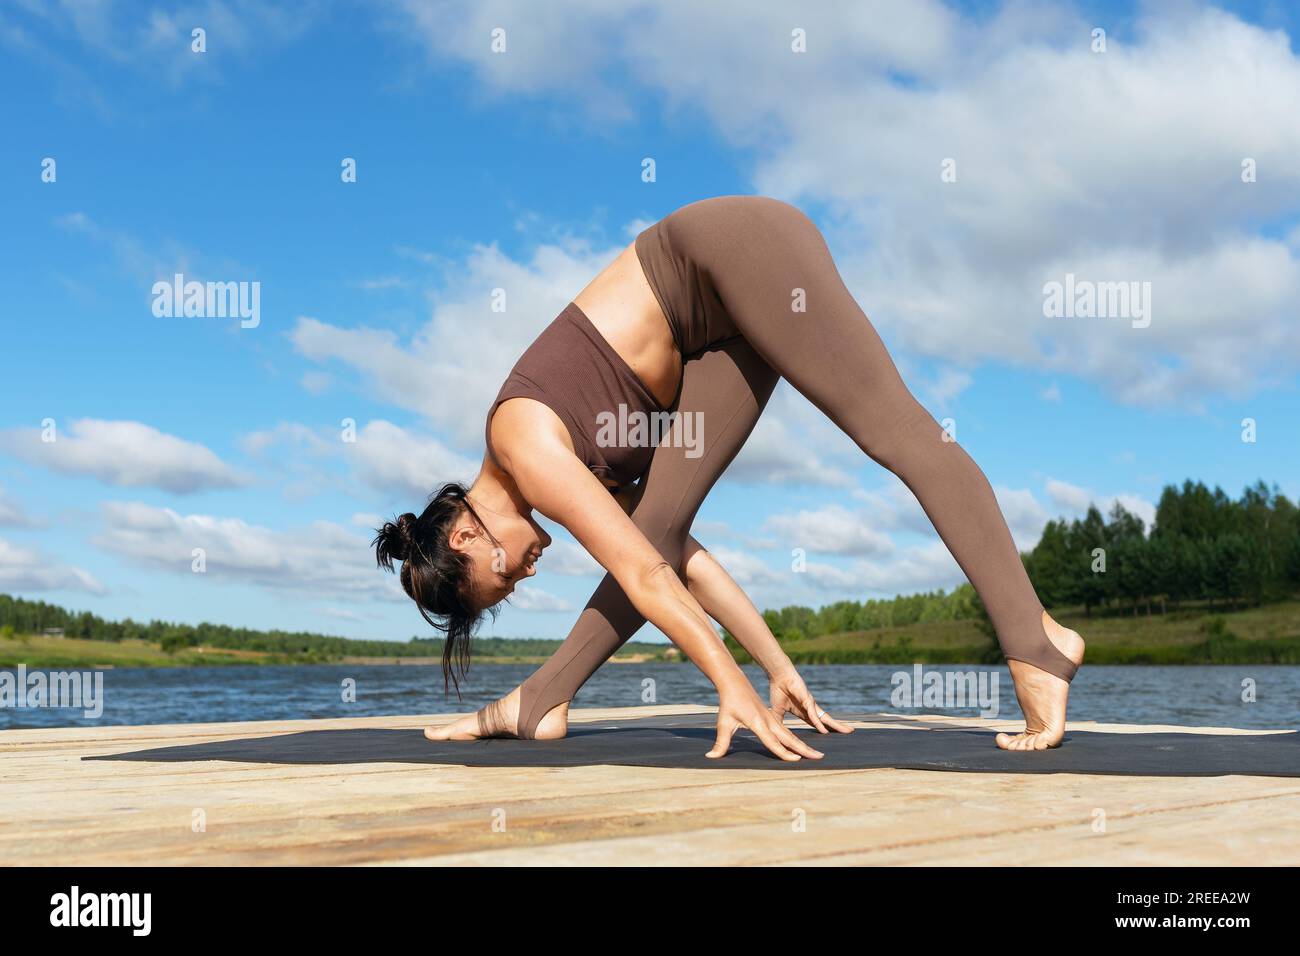 A female yoga practitioner performs a variation of Parshvottanasana, Intense Lateral Stretch Pose, exercising in sportswear on a lakeside on a warm su Stock Photo